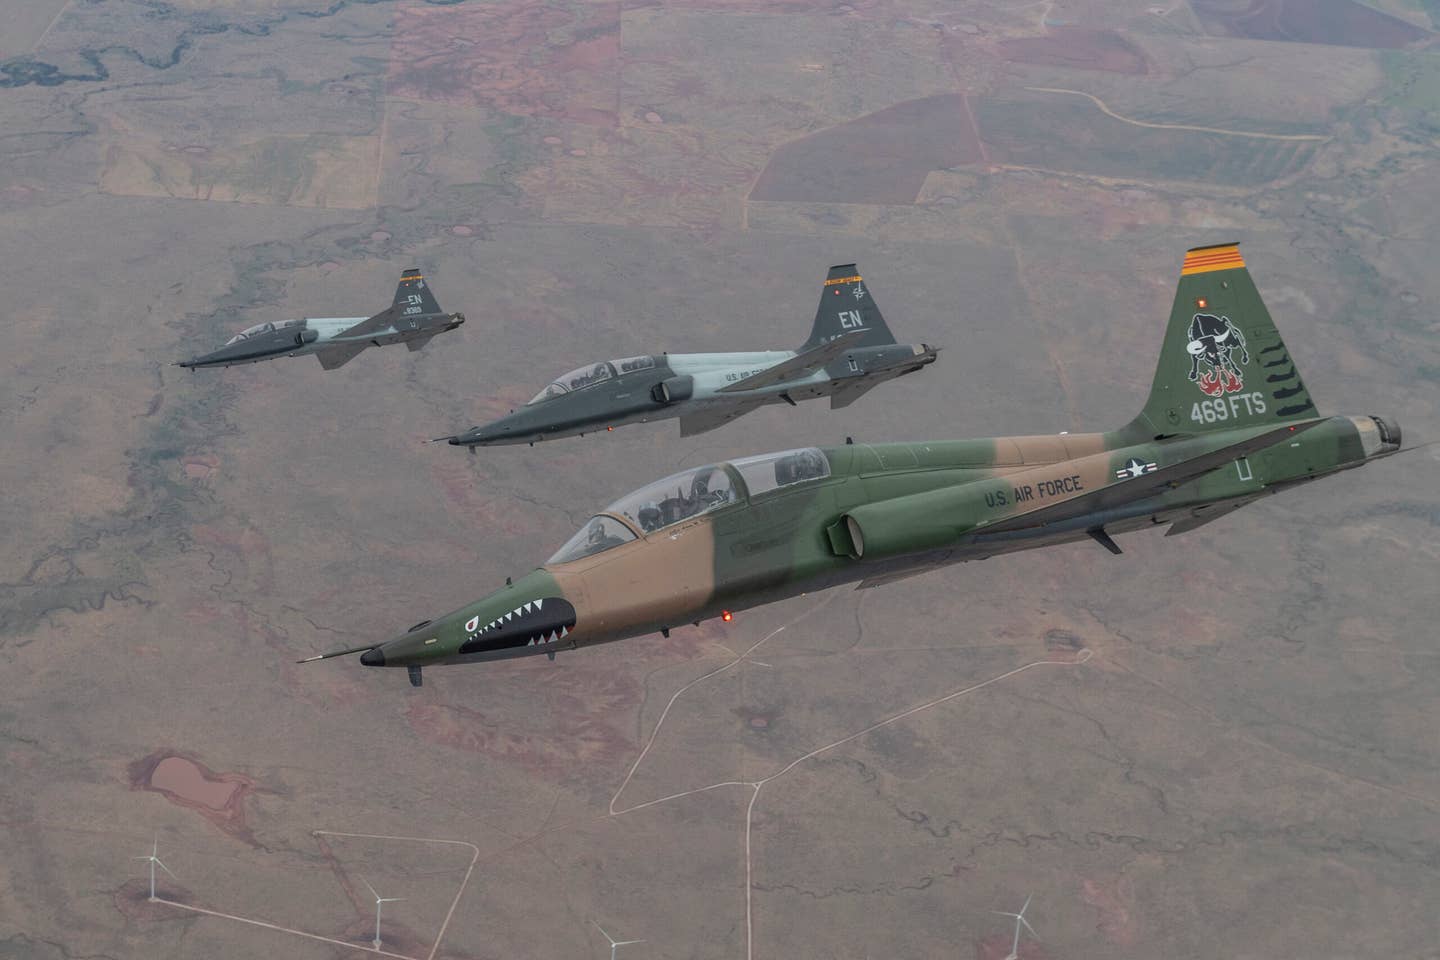 Instructor pilots assigned to the Euro-NATO Joint Jet Pilot Training Program operate U.S. Air Force T-38C Talon aircraft above Wichita Falls, Texas, July 21, 2022.  (U.S Air Force photo by Staff Sgt. Joseph Pick)